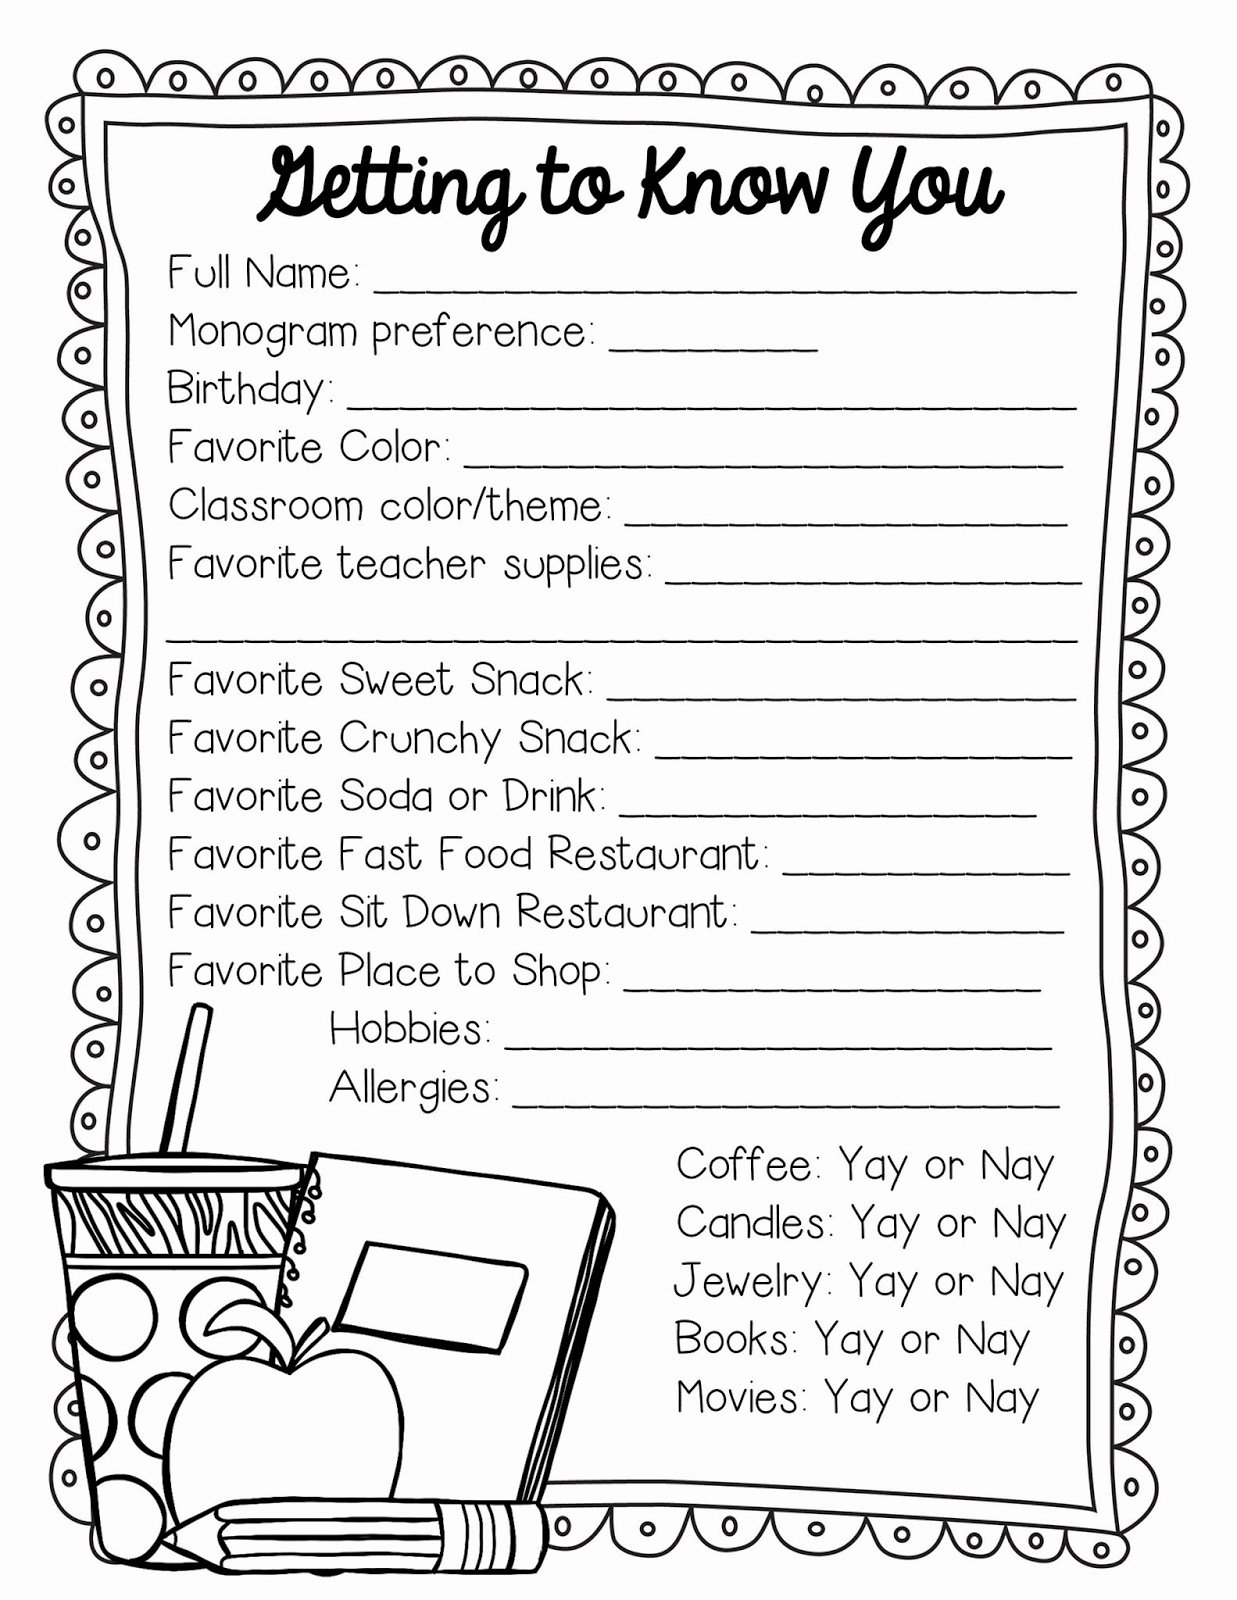 Getting to Know You Worksheet Lovely 2nd Grade Snickerdoodles Getting to Know the Teacher Freebie